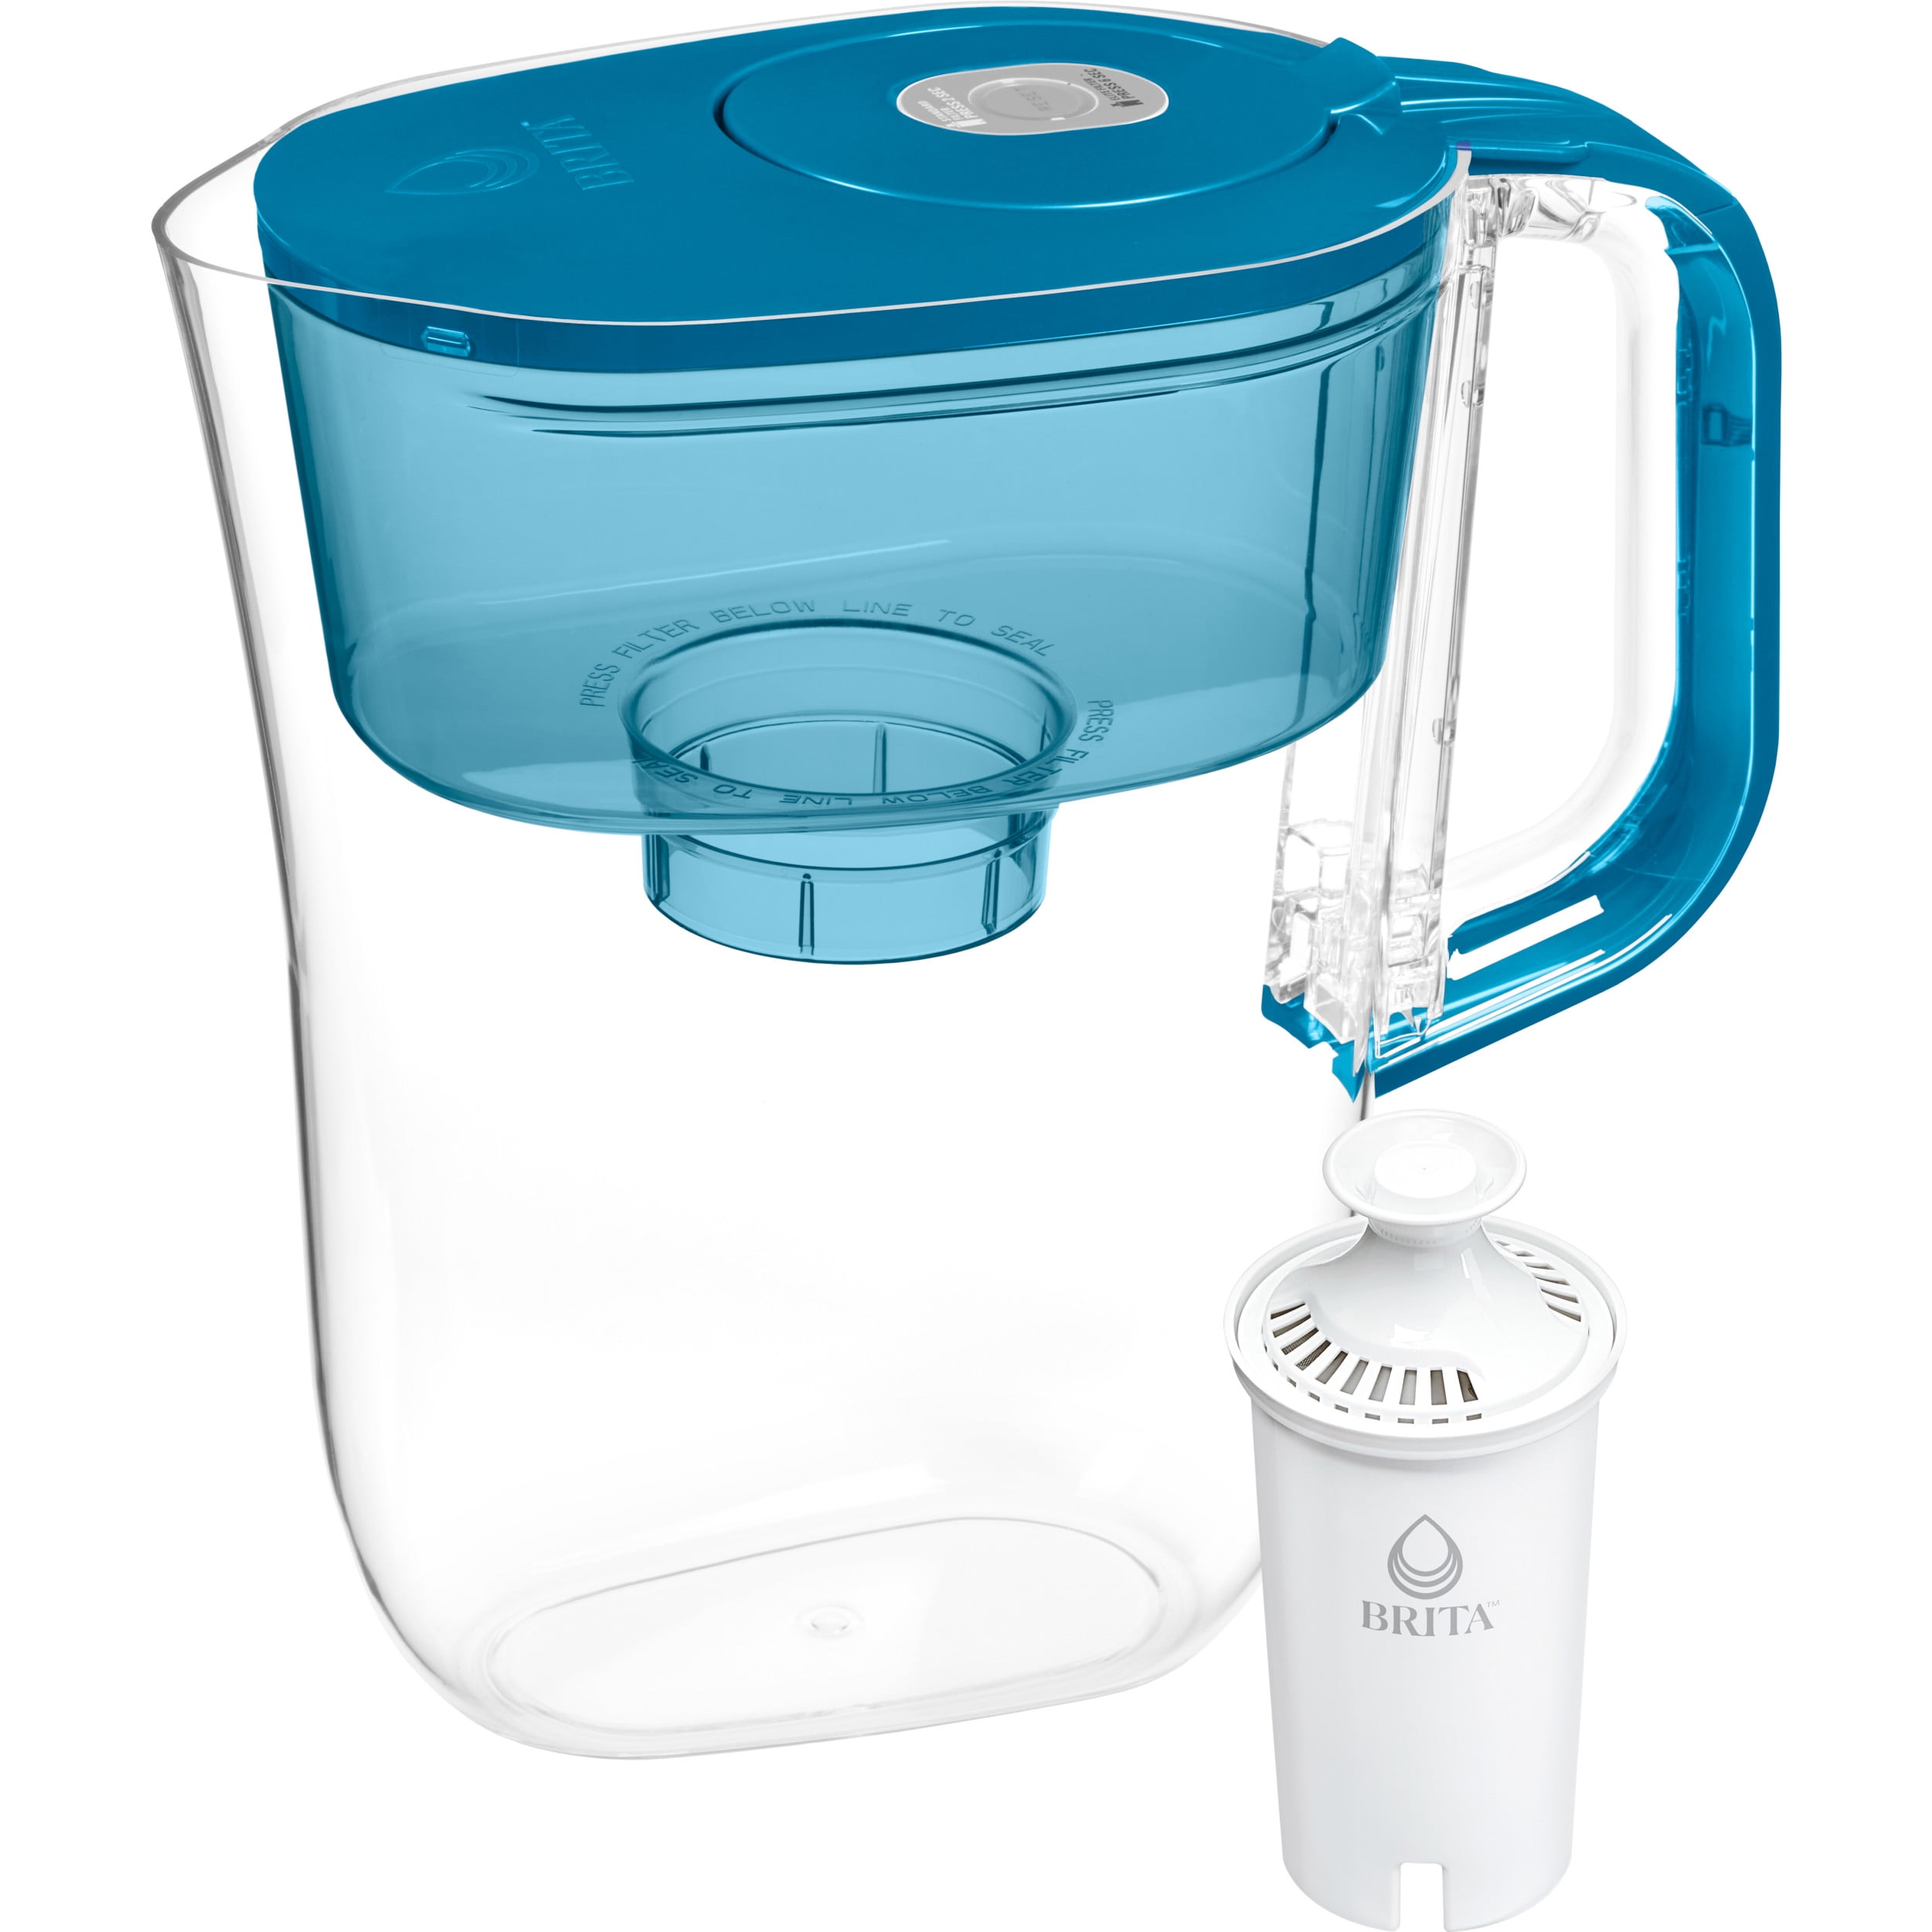 Brita Small 6 Cup Denali Water Filter Pitcher with 1 Standard Filter, Teal - 1 ct